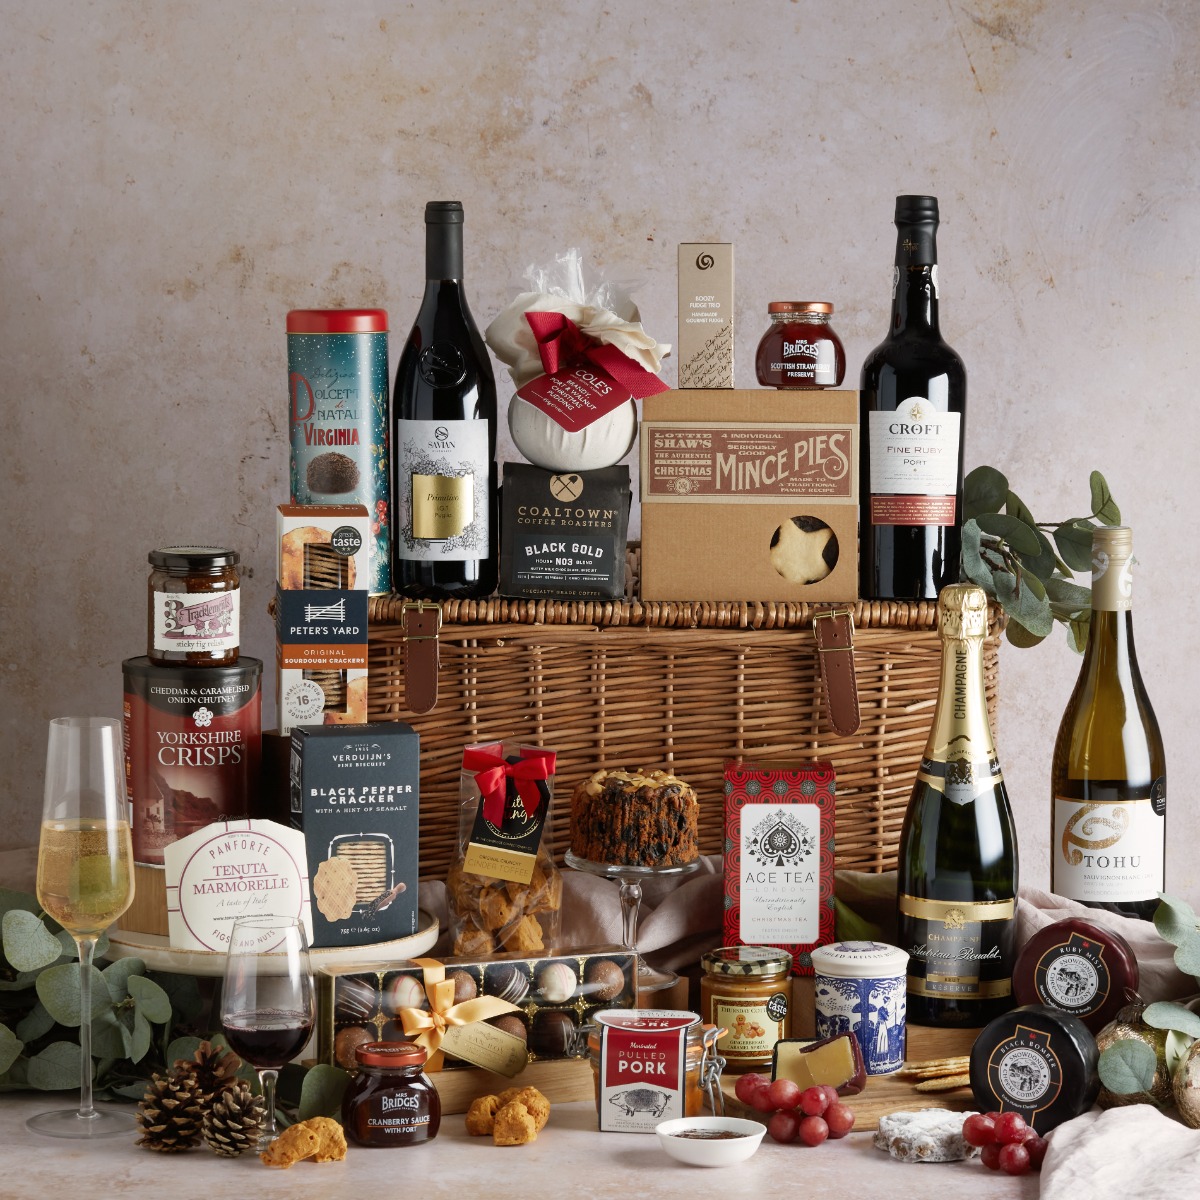 The Grand Christmas Hamper with all of its contents on display